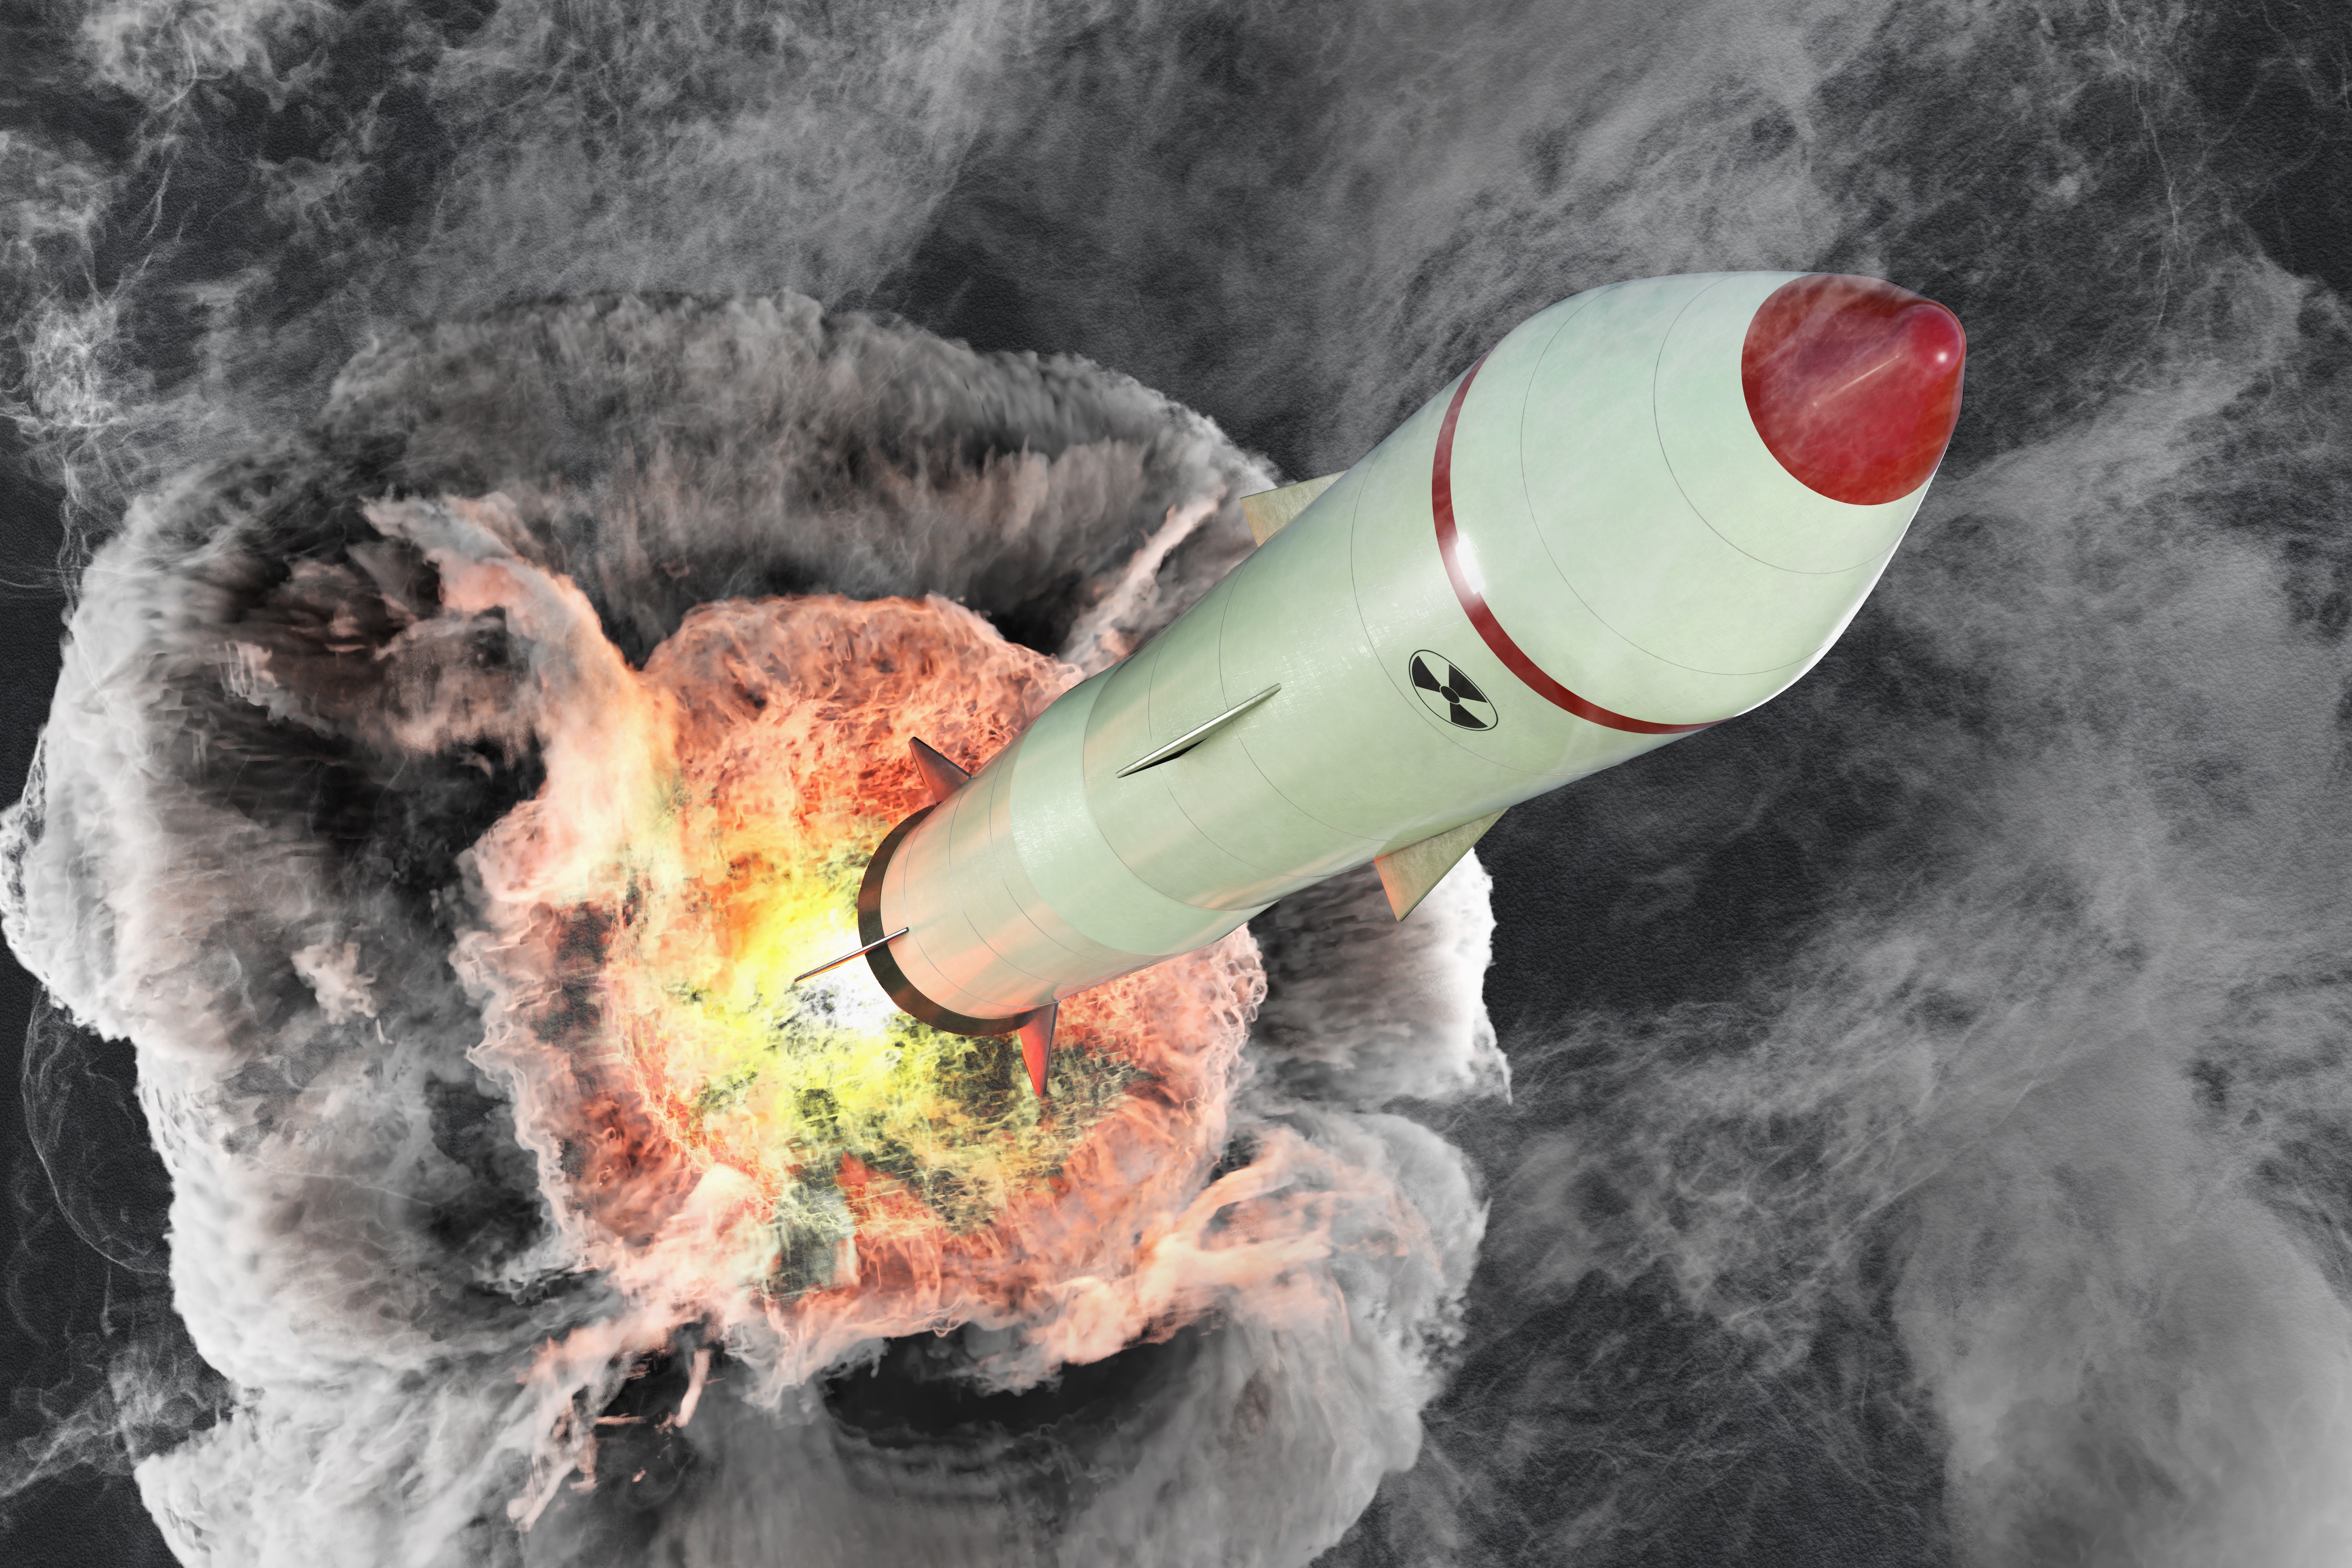 NASA and DARPA will build a nuclear rocket by 2027